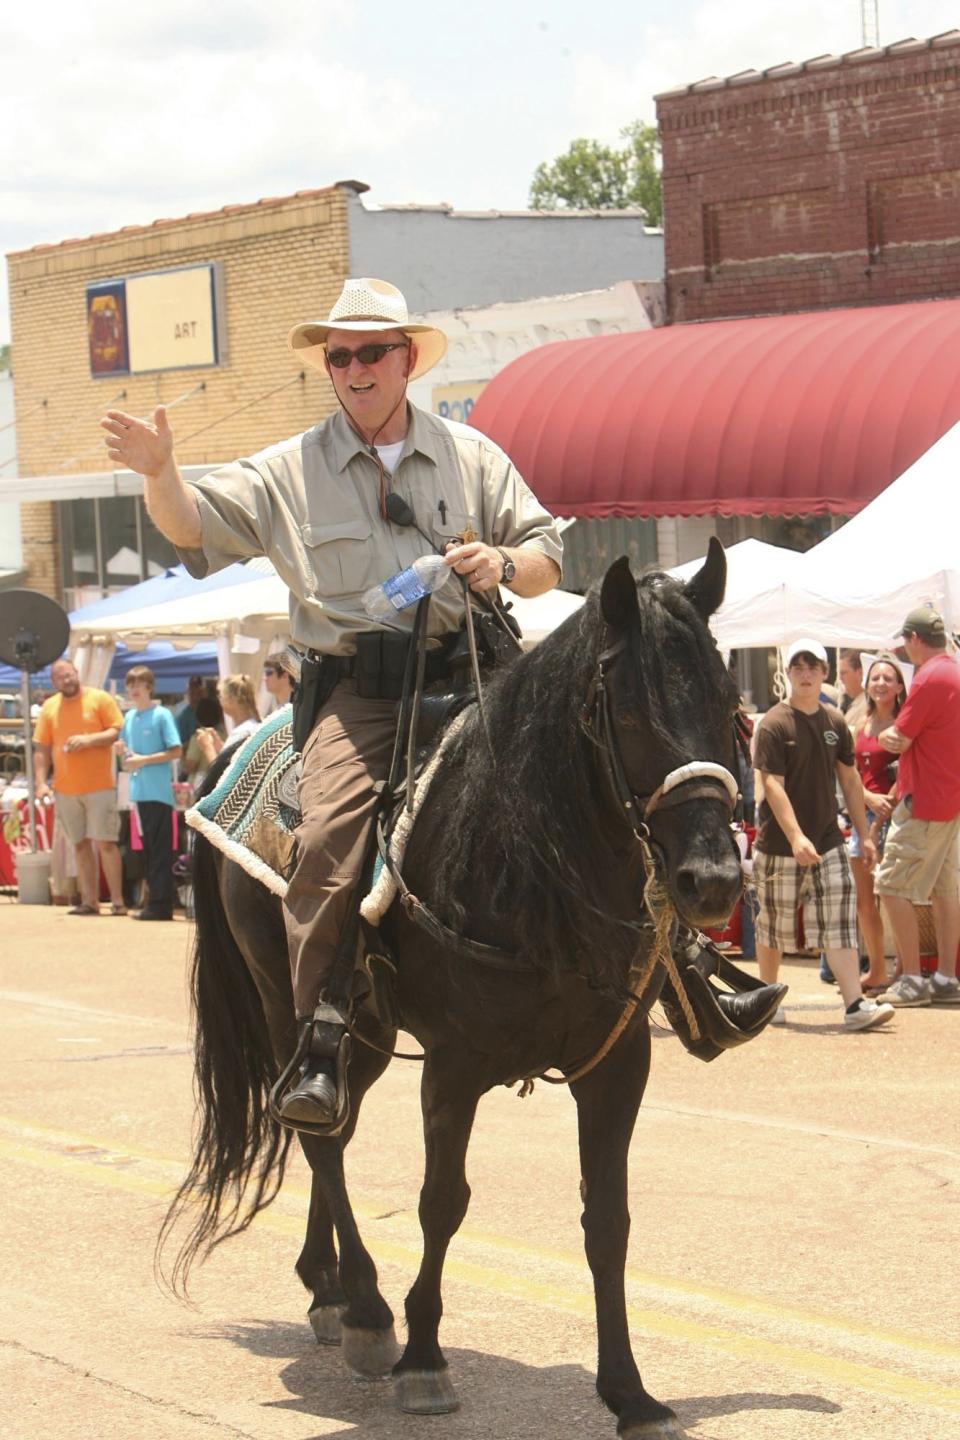 In this June 7, 2008 photo, Pickens County Sheriff David Abston waves from his horse during the Mule Day/Chicken Festival in Gordo, Ala. Court records show Abston was arrested Friday, June 14, 2019, and is pleading guilty to fraud and filing a false tax return. He is charged with scamming a food bank and his own church to pocket thousands under a law that let state sheriffs profit from feeding prisoners. (Michael Palmer/The Tuscaloosa News via AP)